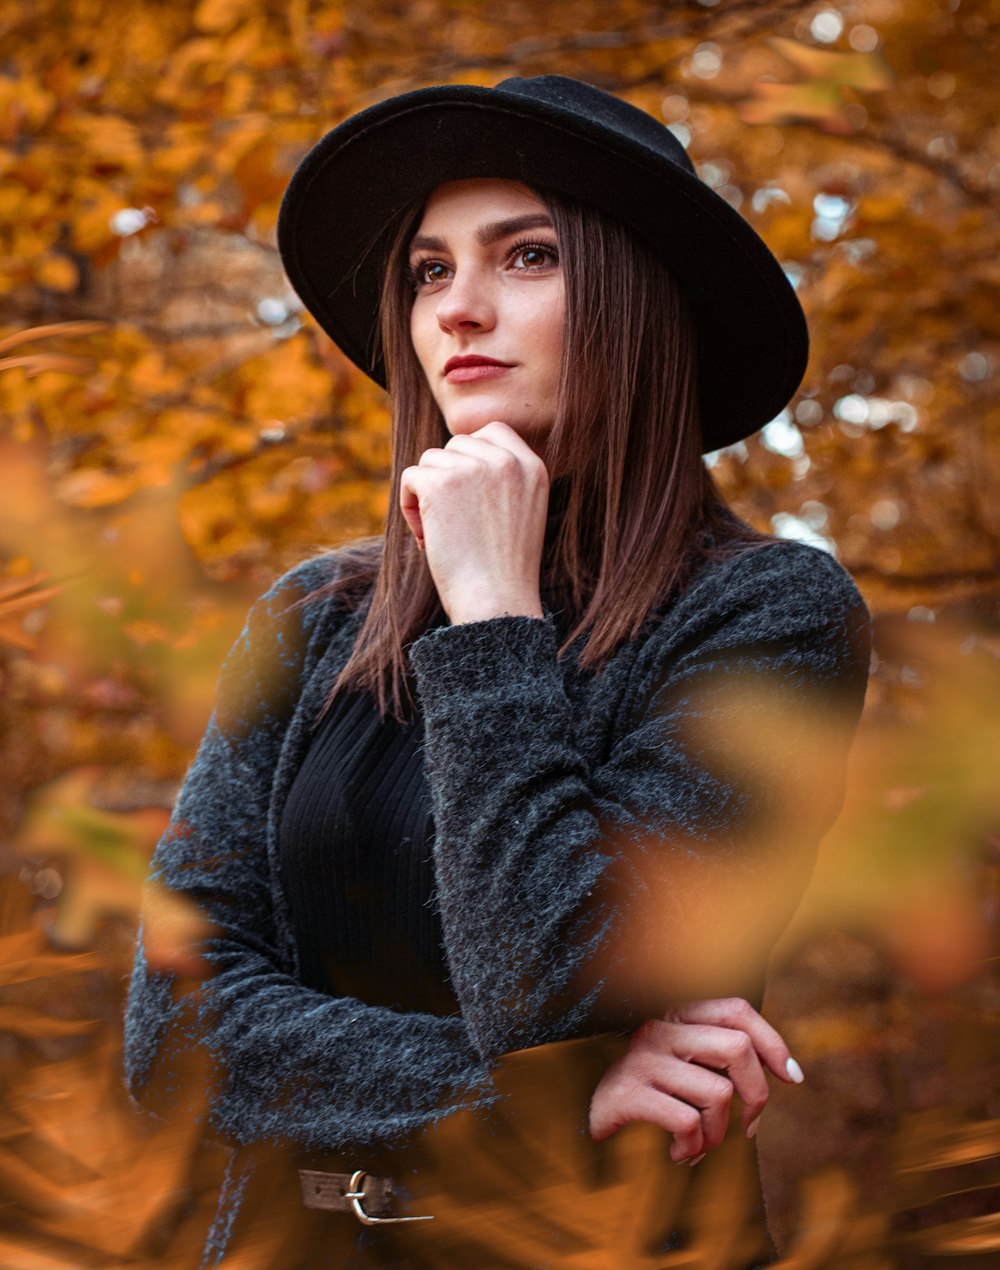 woman in black hat and black long sleeve shirt